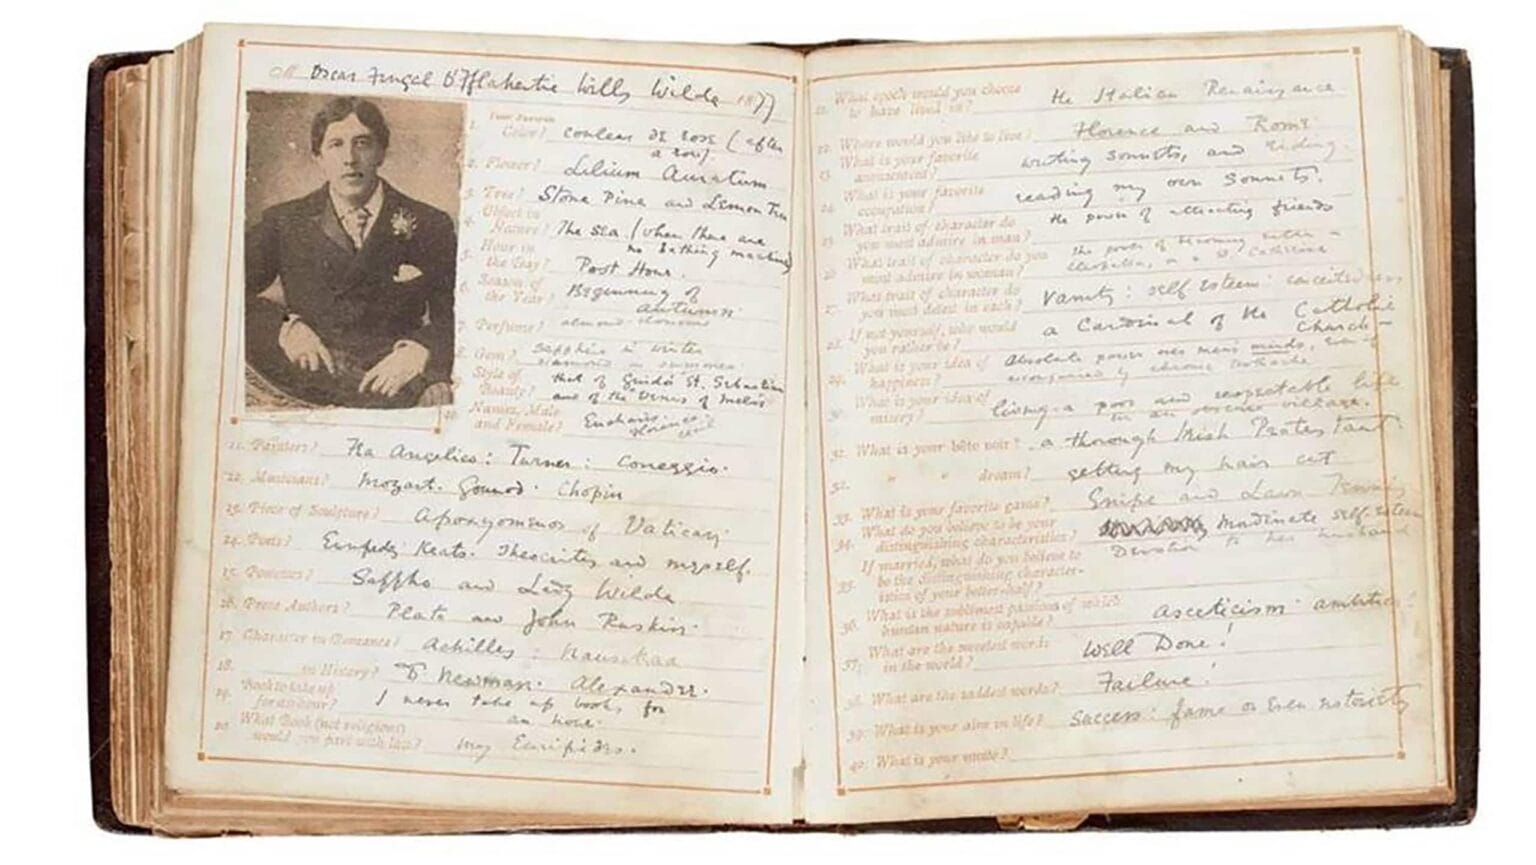 Questionnaire filled in by young Oscar Wilde